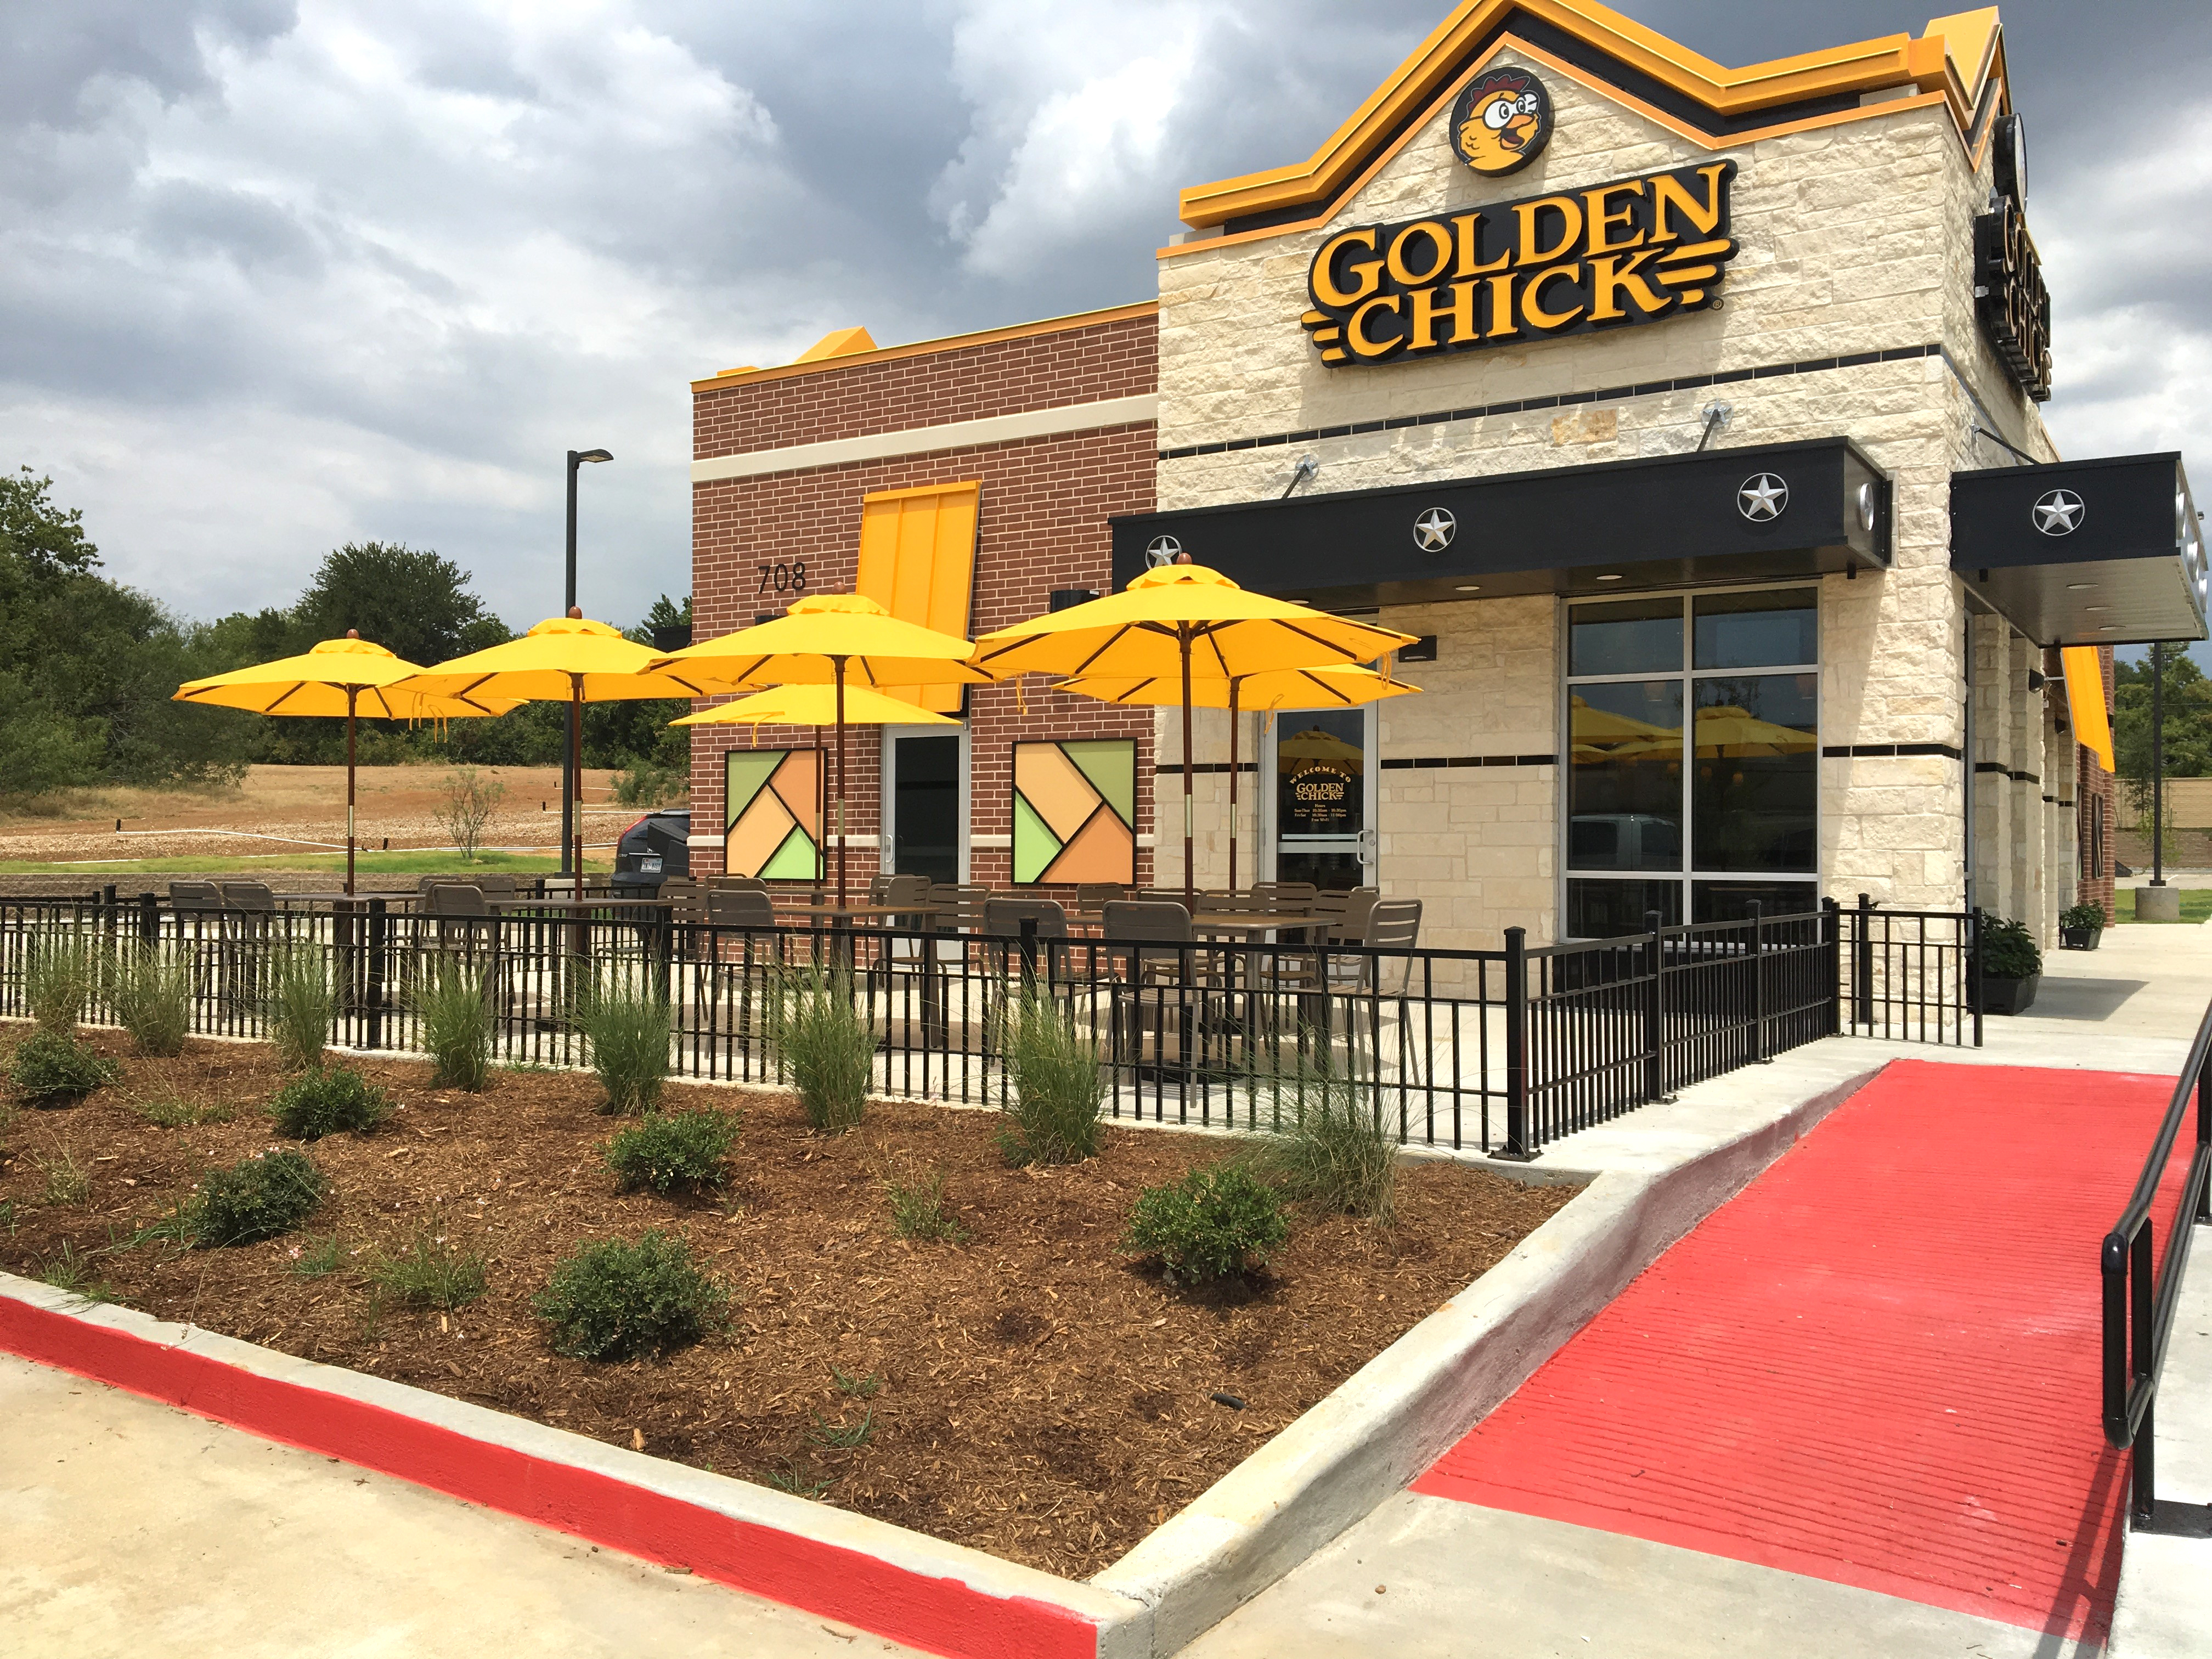 Golden Chick storefront.  Your local Golden Chick fast food restaurant in Euless, Texas